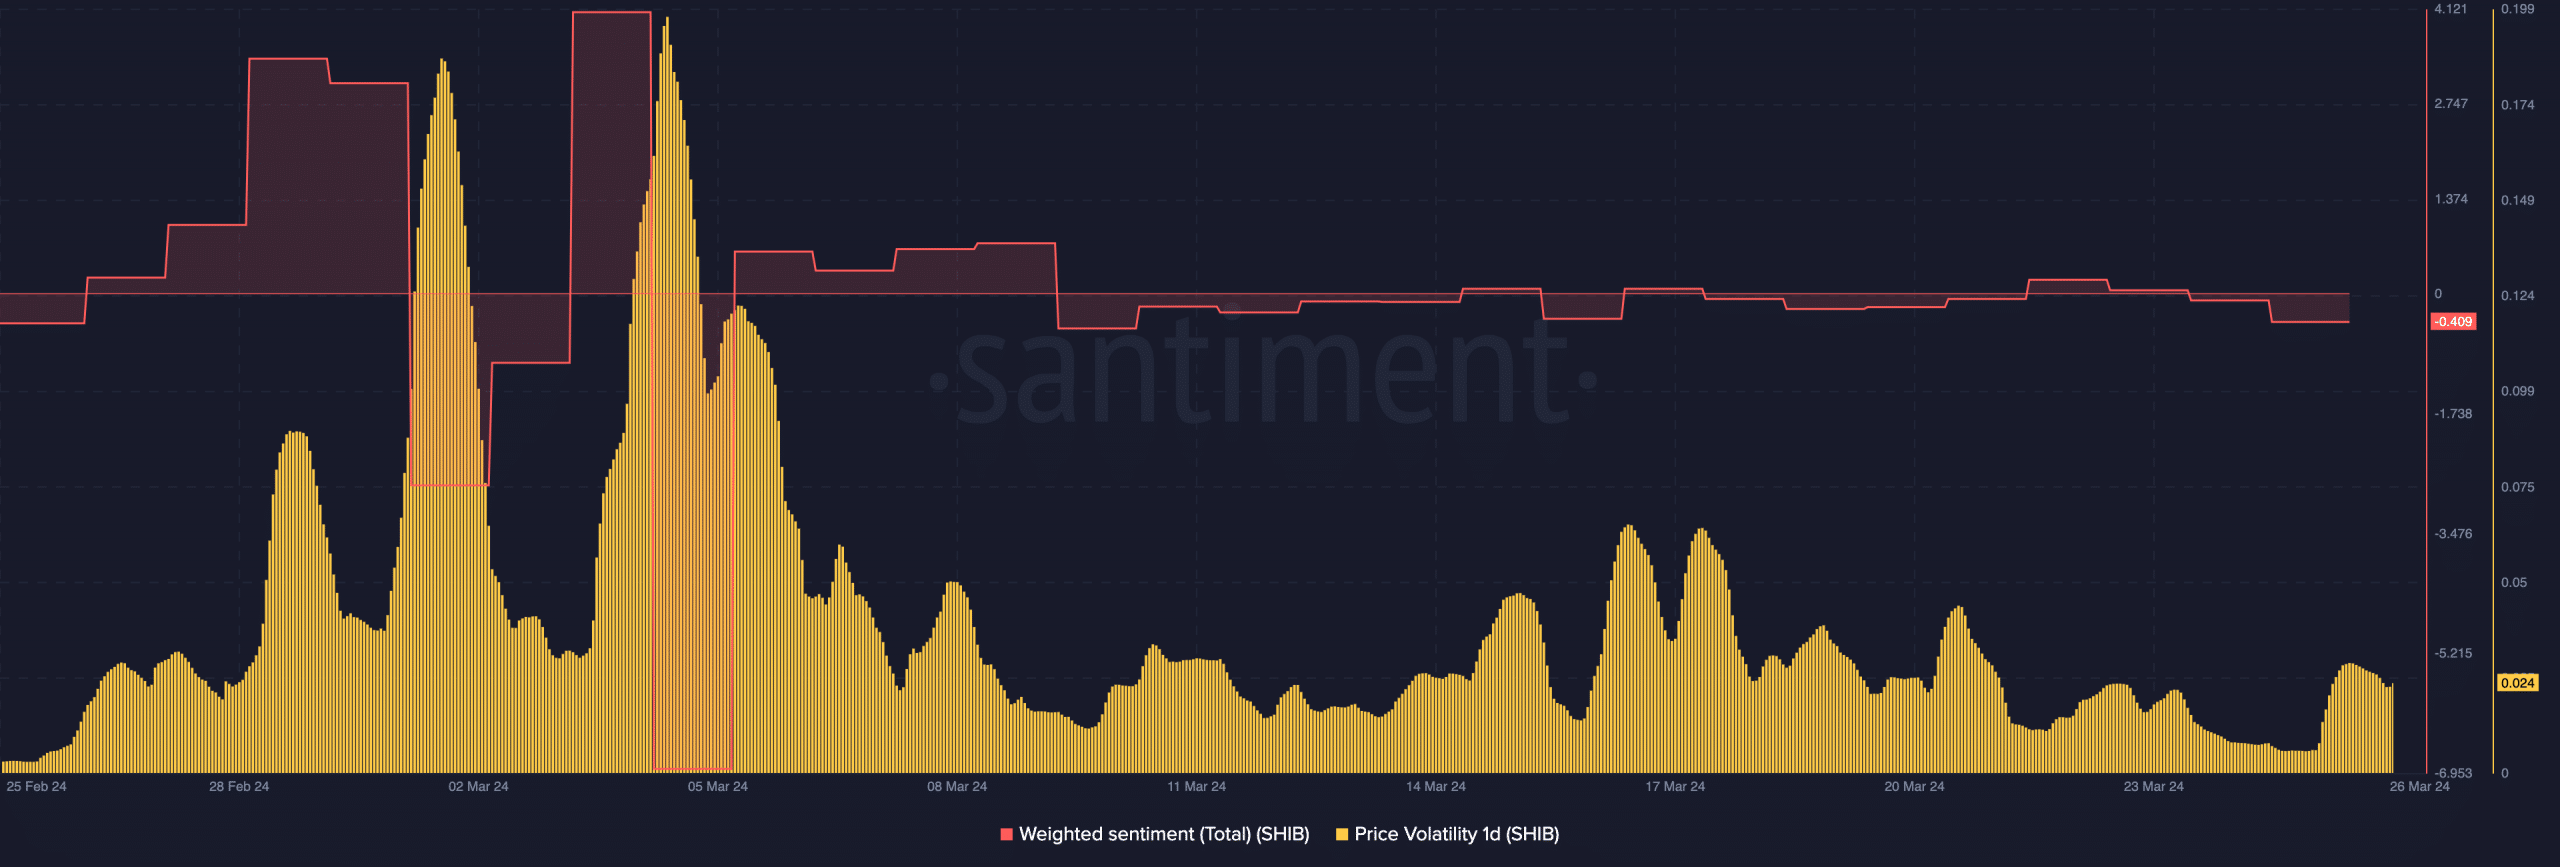 SHIB's on-chain data showing low price fluctuations